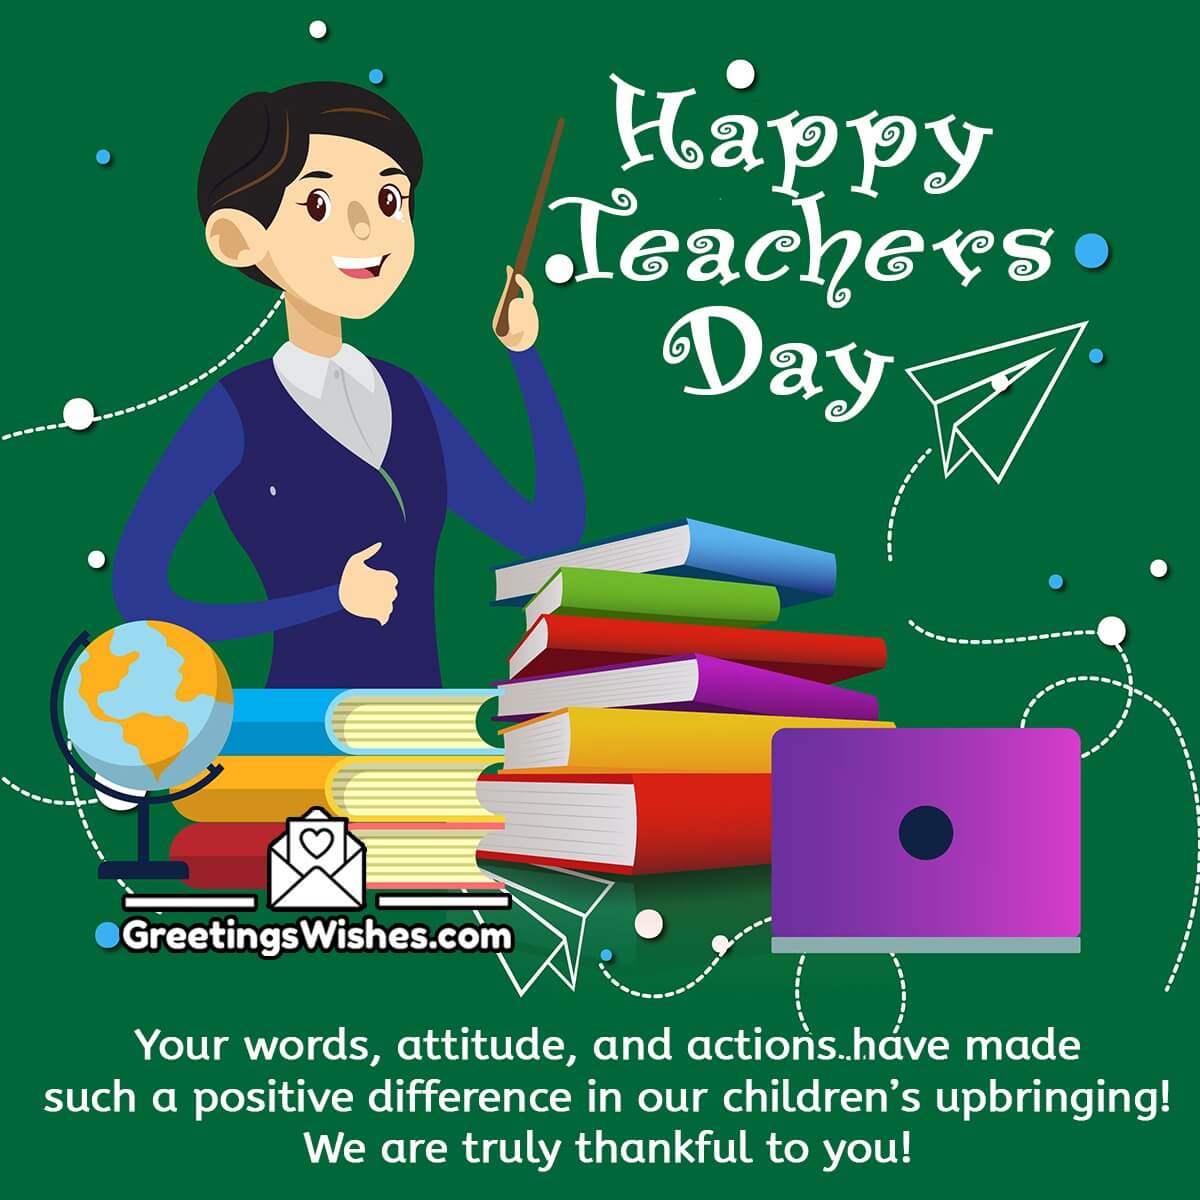 Teachers Day Message From Parents